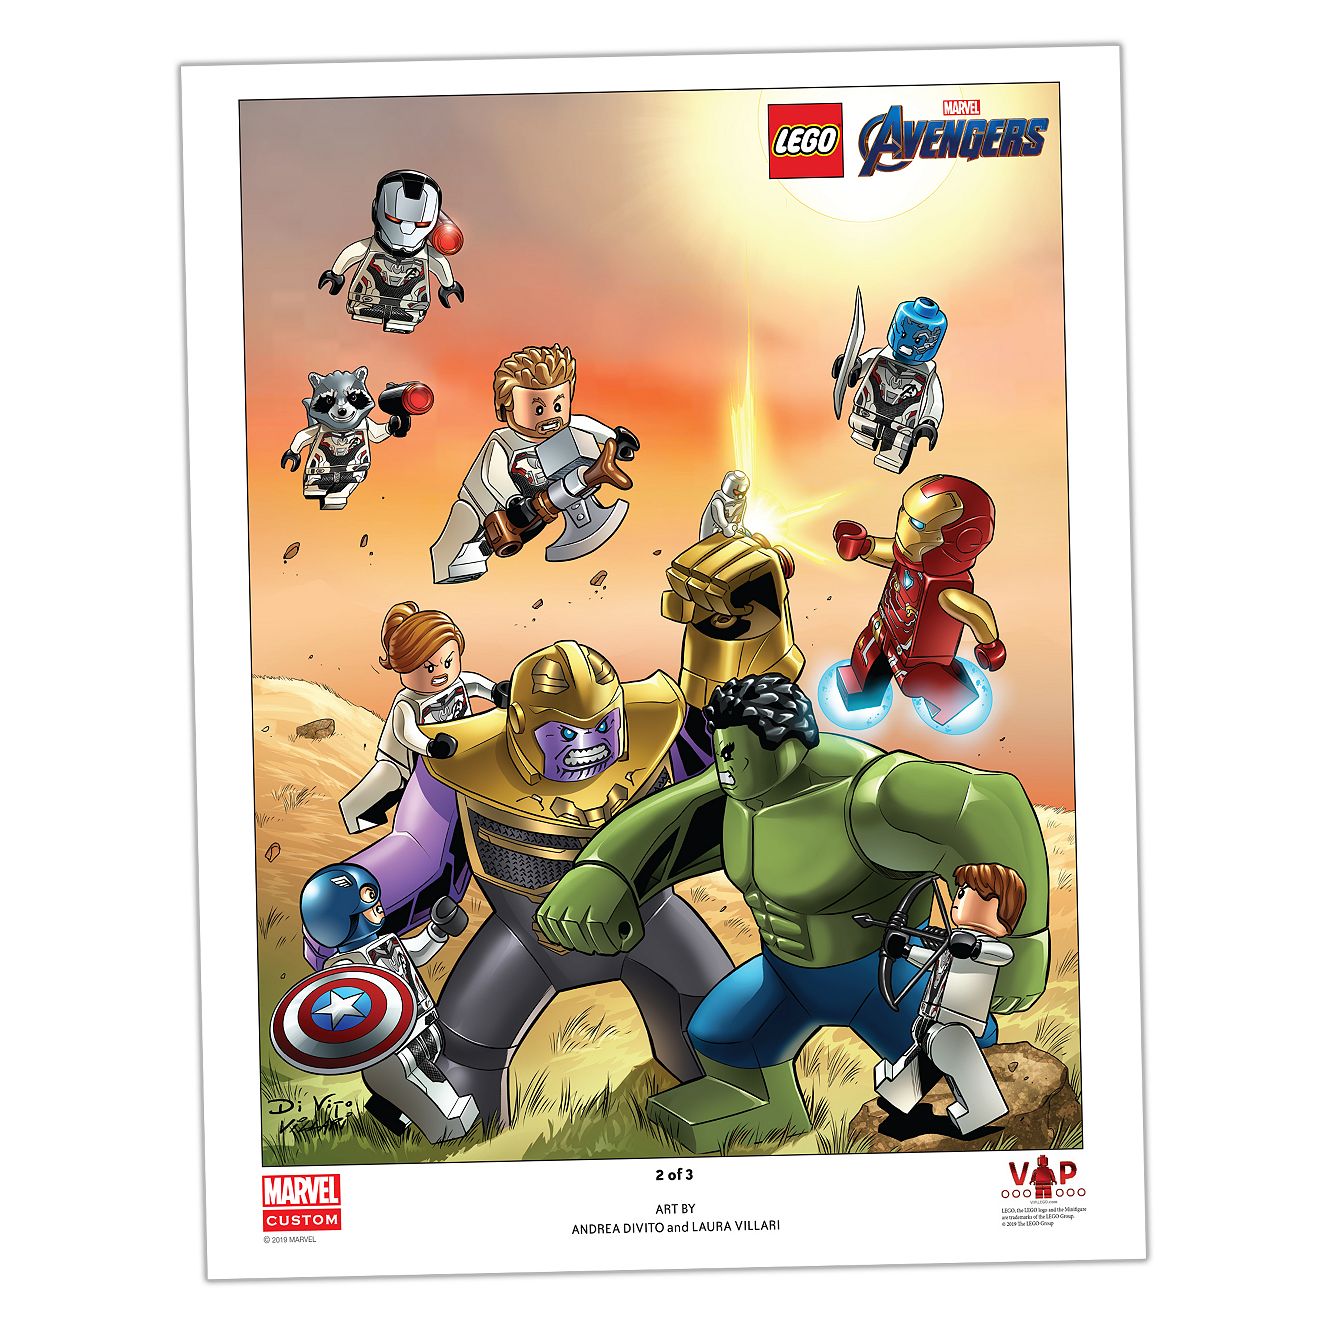 Lego Avengers Endgame Art Print 2 Of 3 5005881 Unknown Buy Online At The Official Lego Shop Us